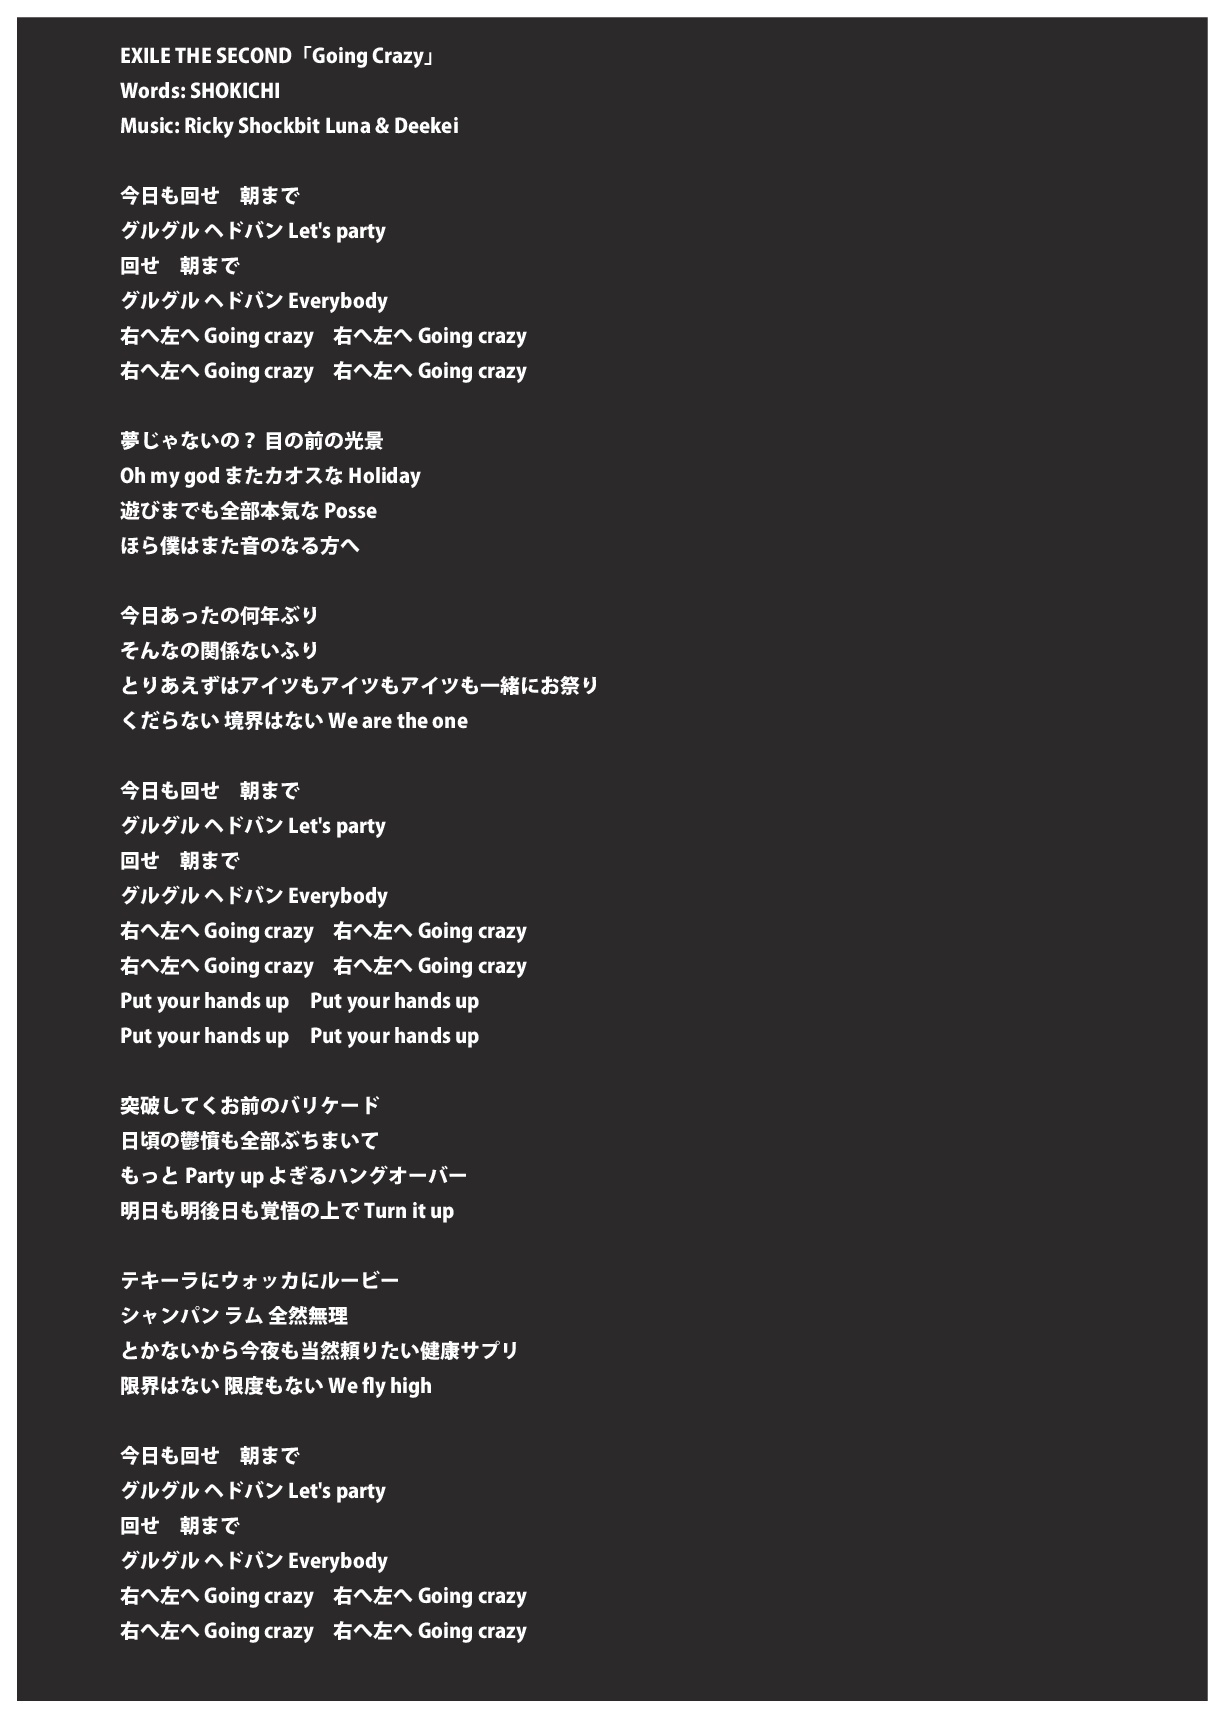 Going Crazy 歌詞公開 Exile Mobile